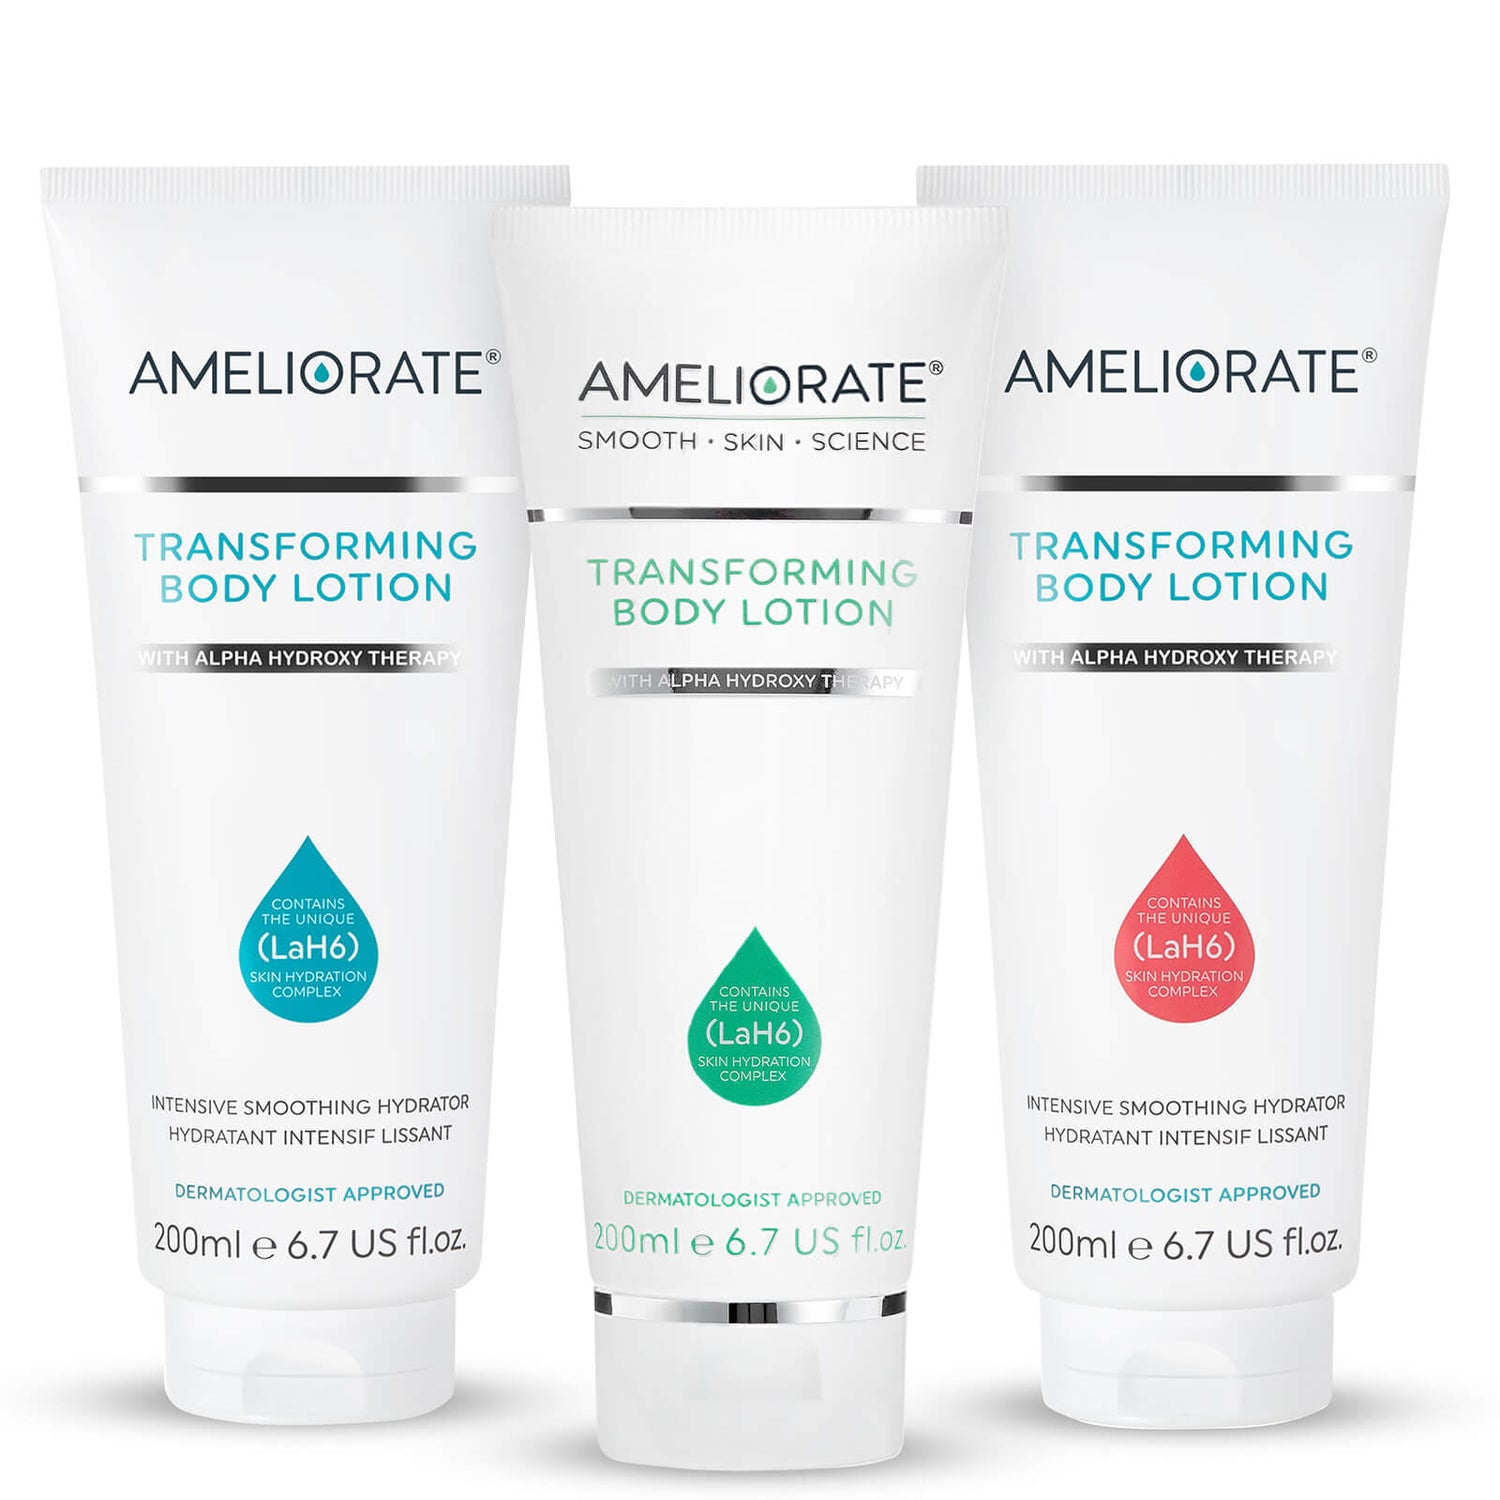 Athletic frugthave Sidelæns AMELIORATE AMELIORATE Fresh Transforming Body Lotion Trio | Free US  Shipping | lookfantastic